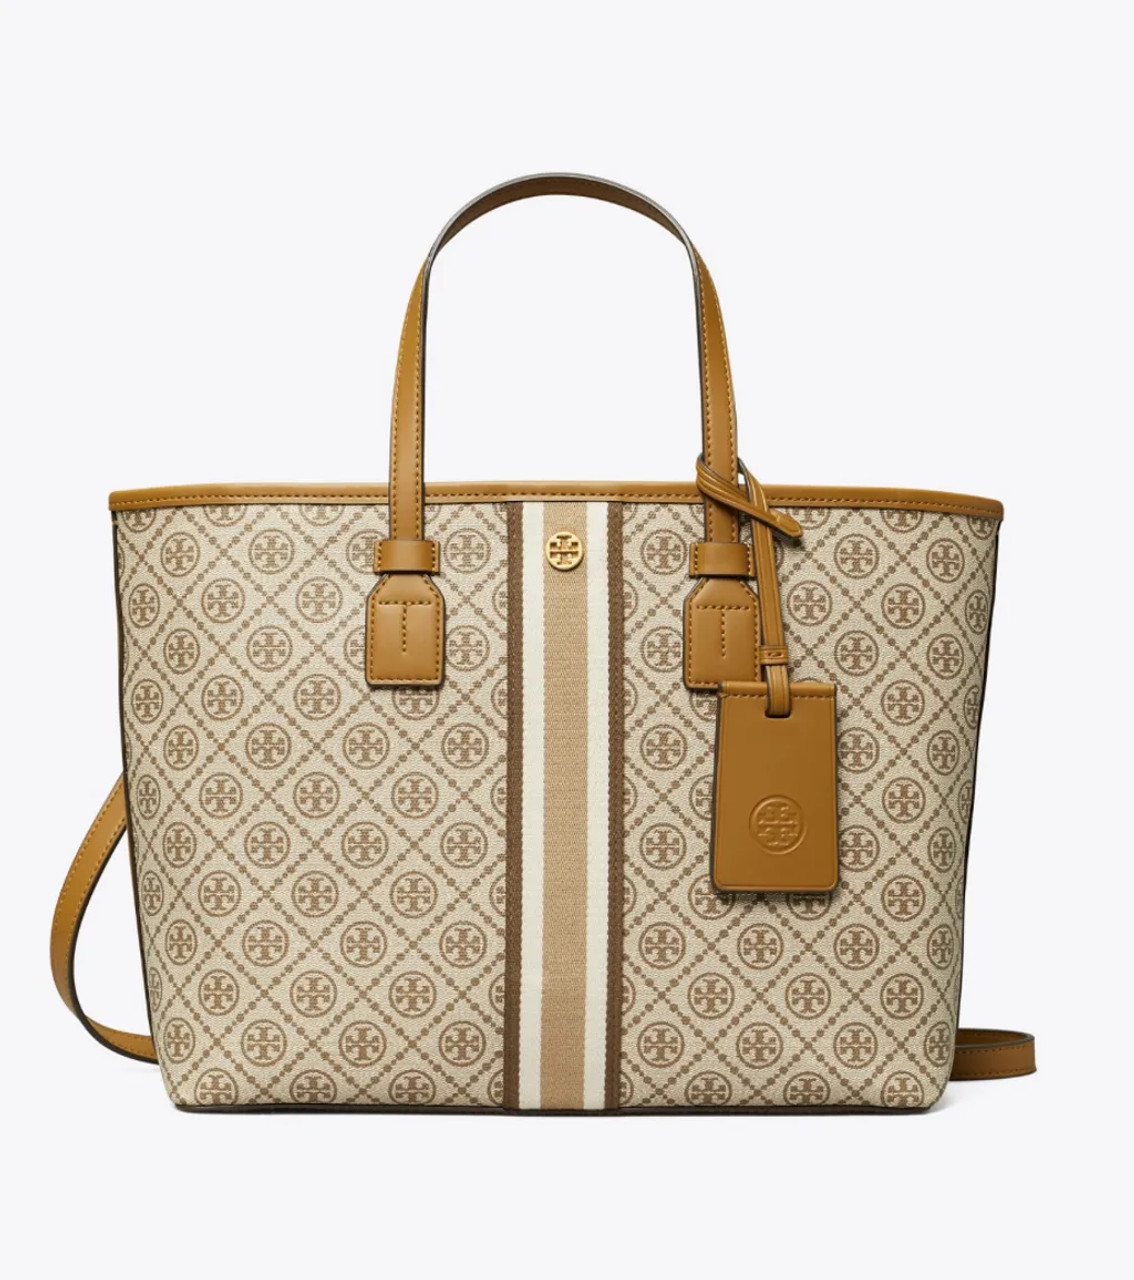 Tory Burch Bag Unboxing  T- Monogram Coated Canvas Tote Bag